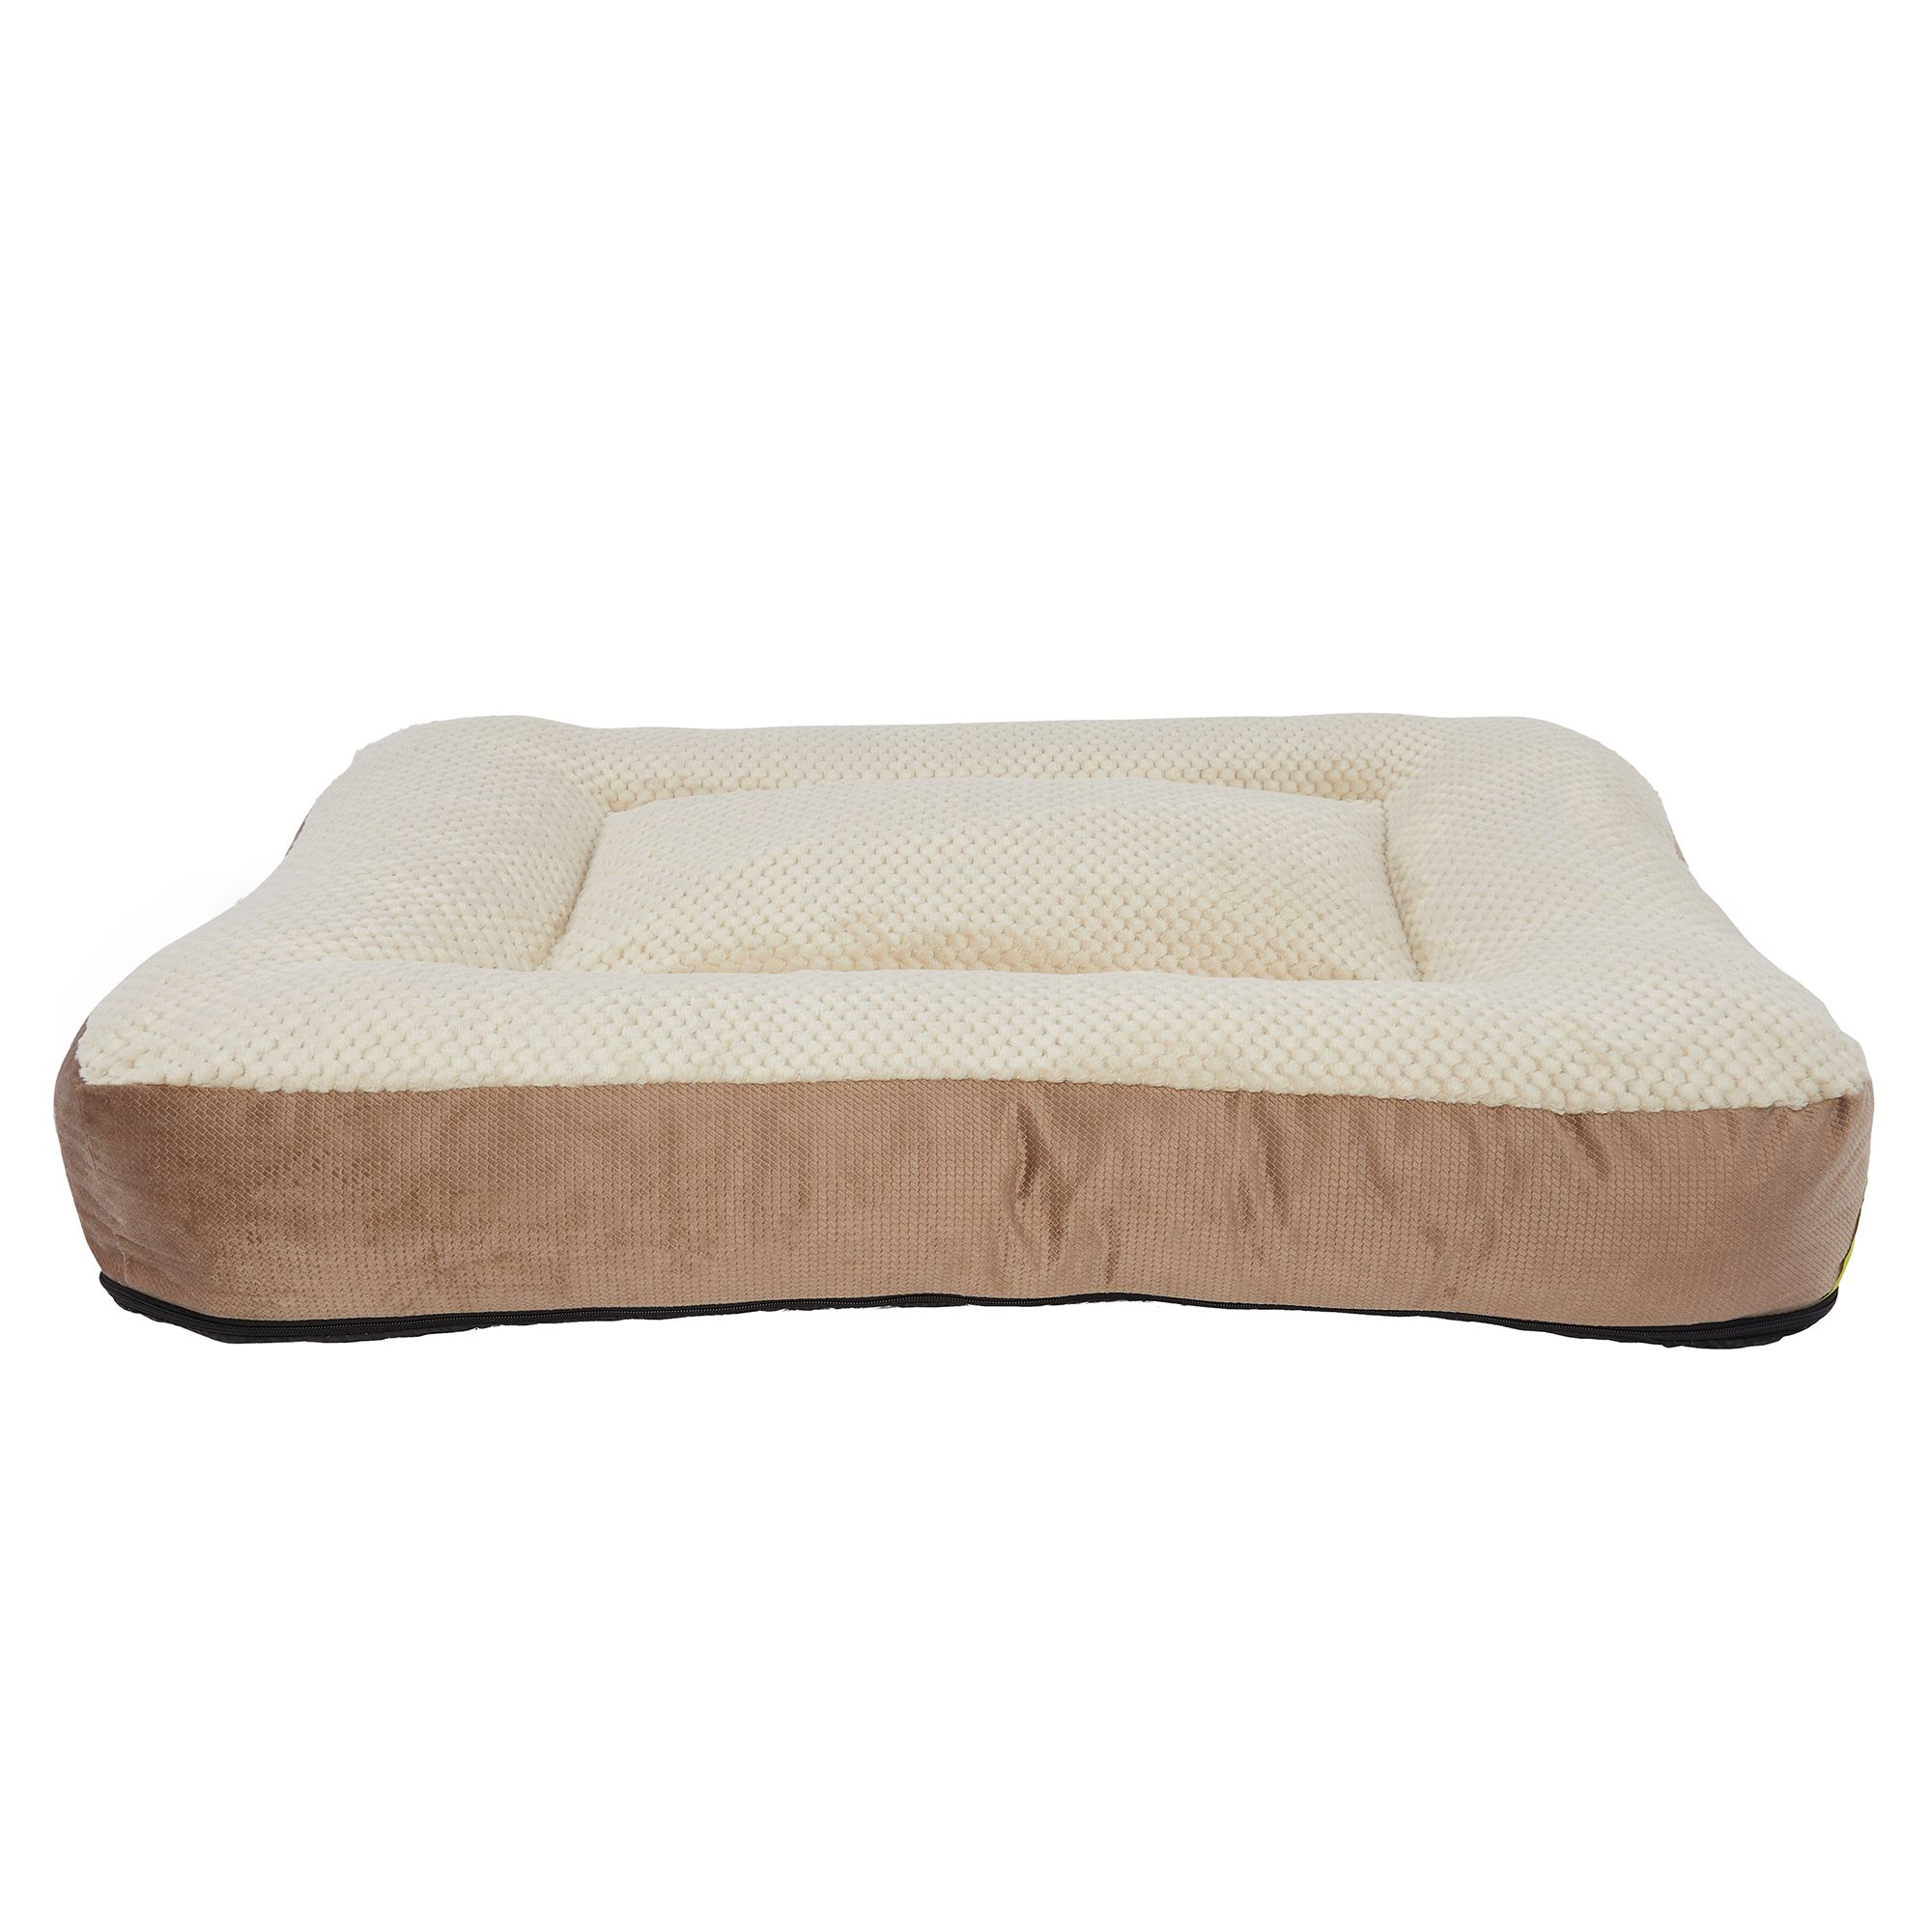 orthopedic luxurious bumper bed